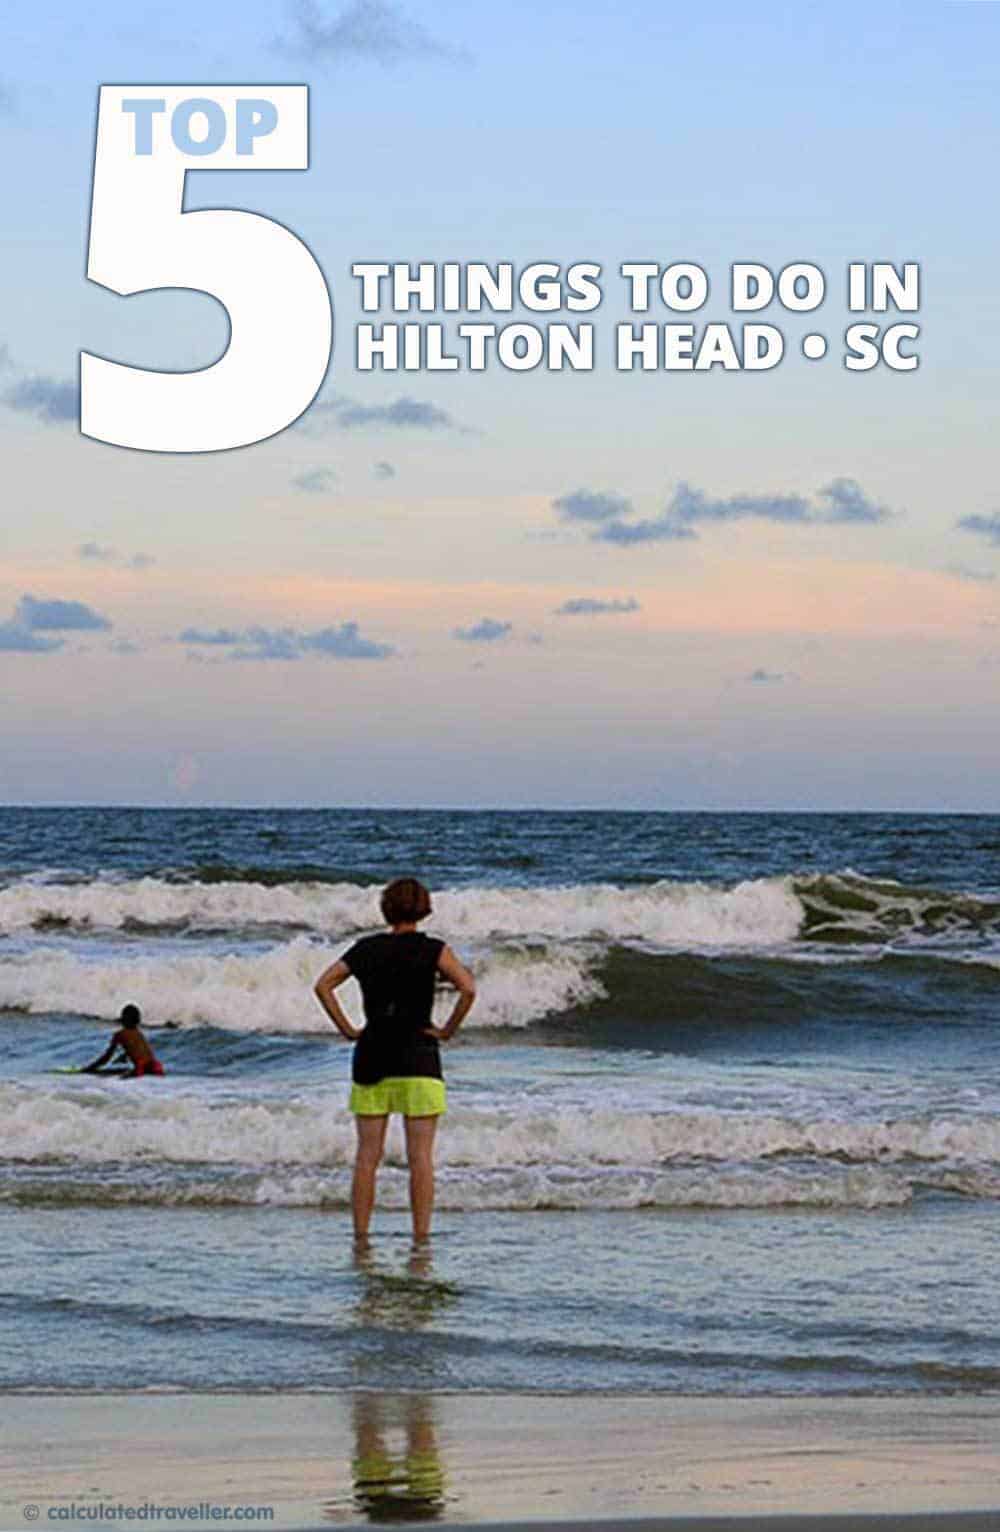 Top 5 Things to do in Hilton Head Island, South Carolina by Calculated Traveller